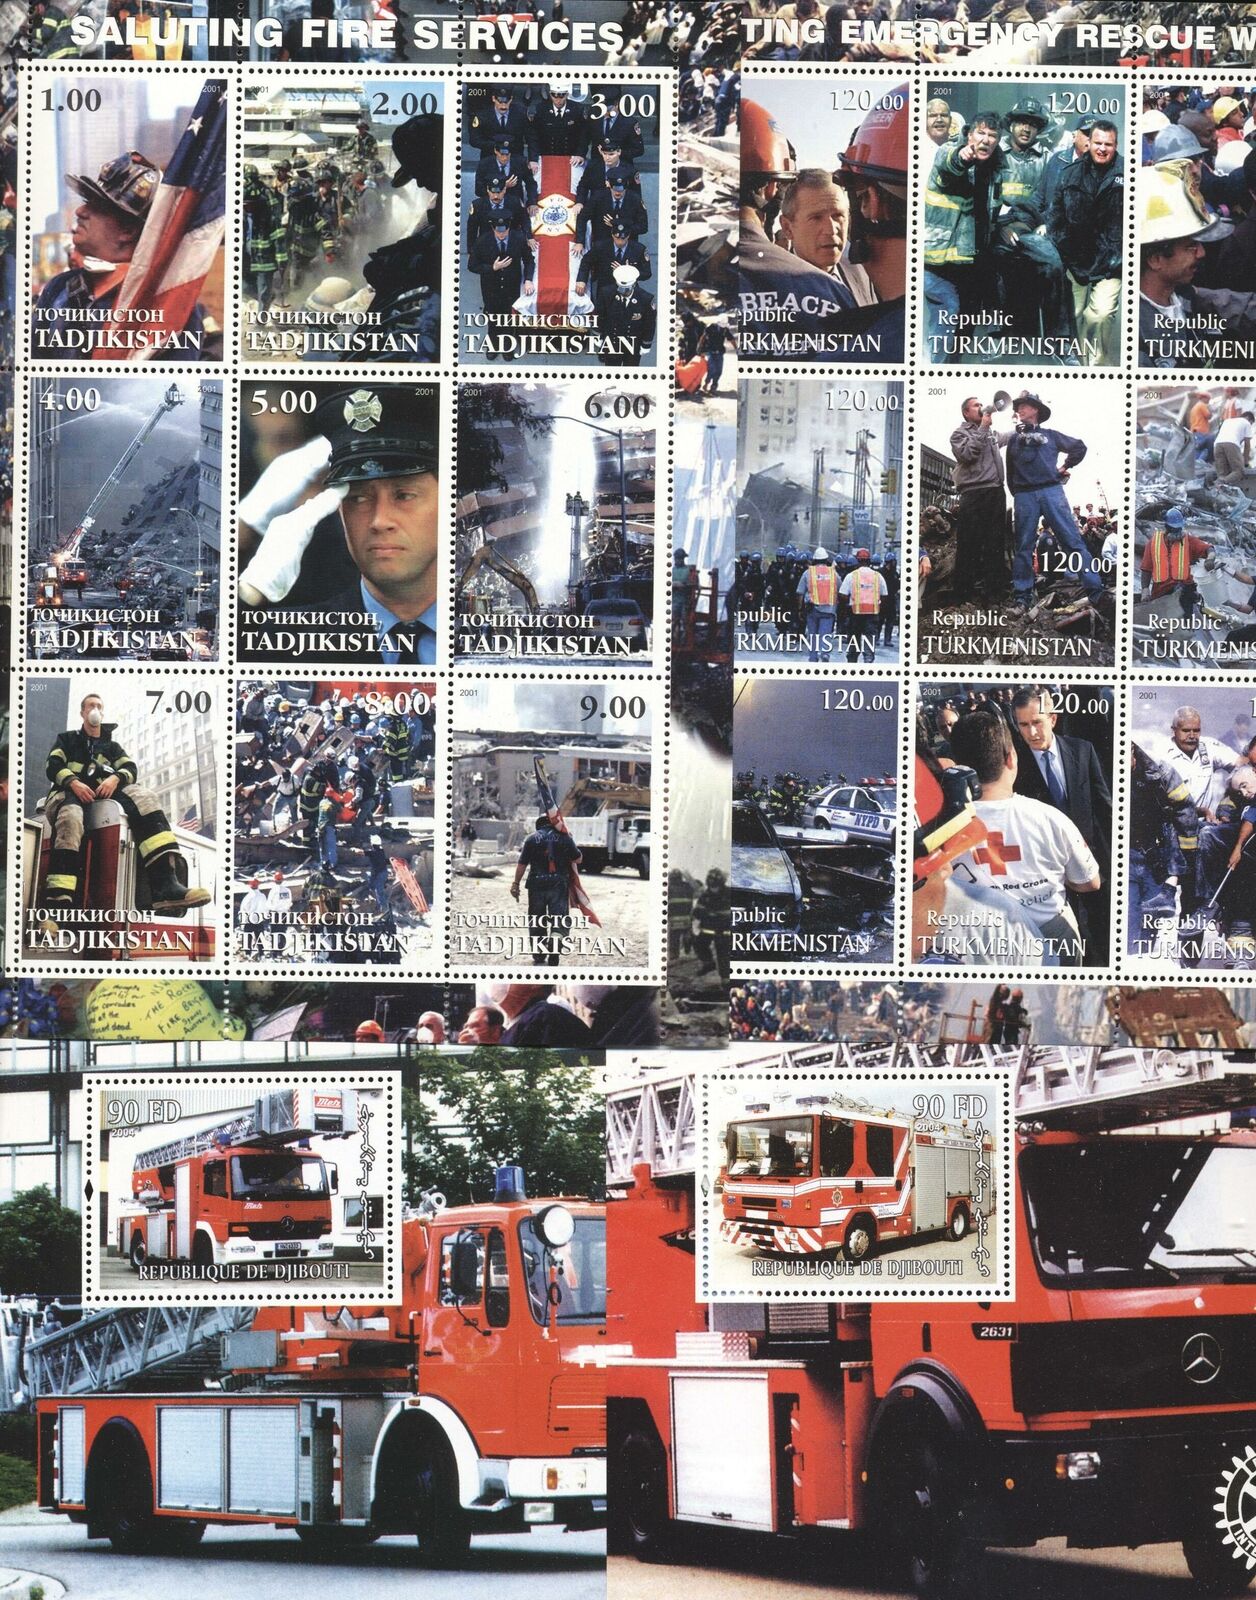 (853527) Fire Engines, Firefighters, World